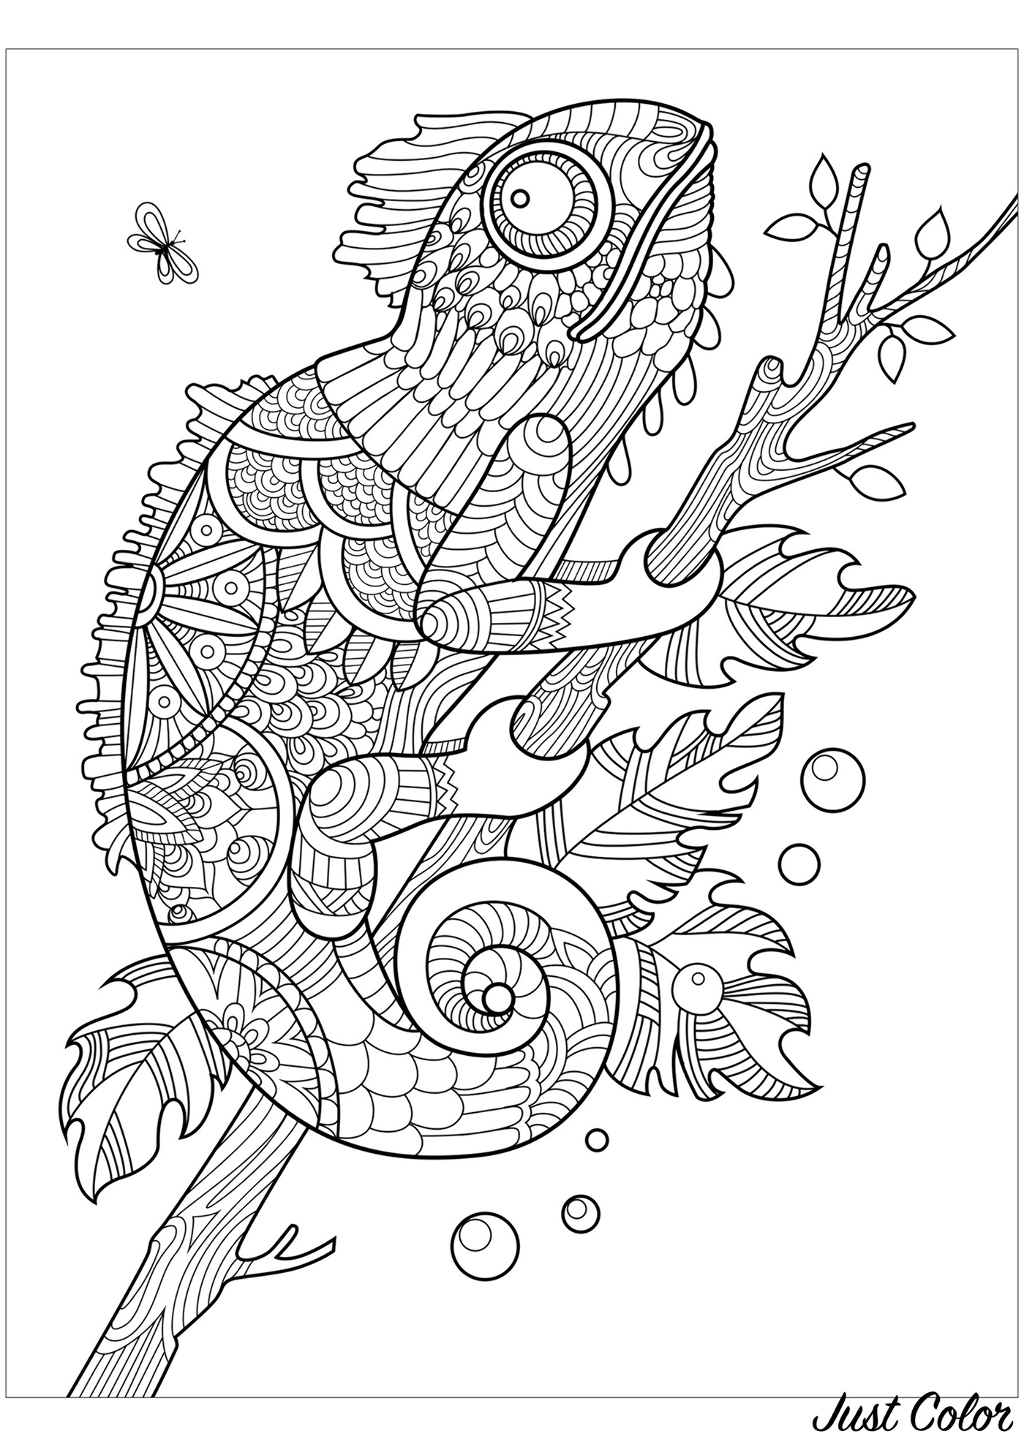 Chameleon with many simple Zentangle patterns.Don't forget to color the little fly that will quickly get eaten !